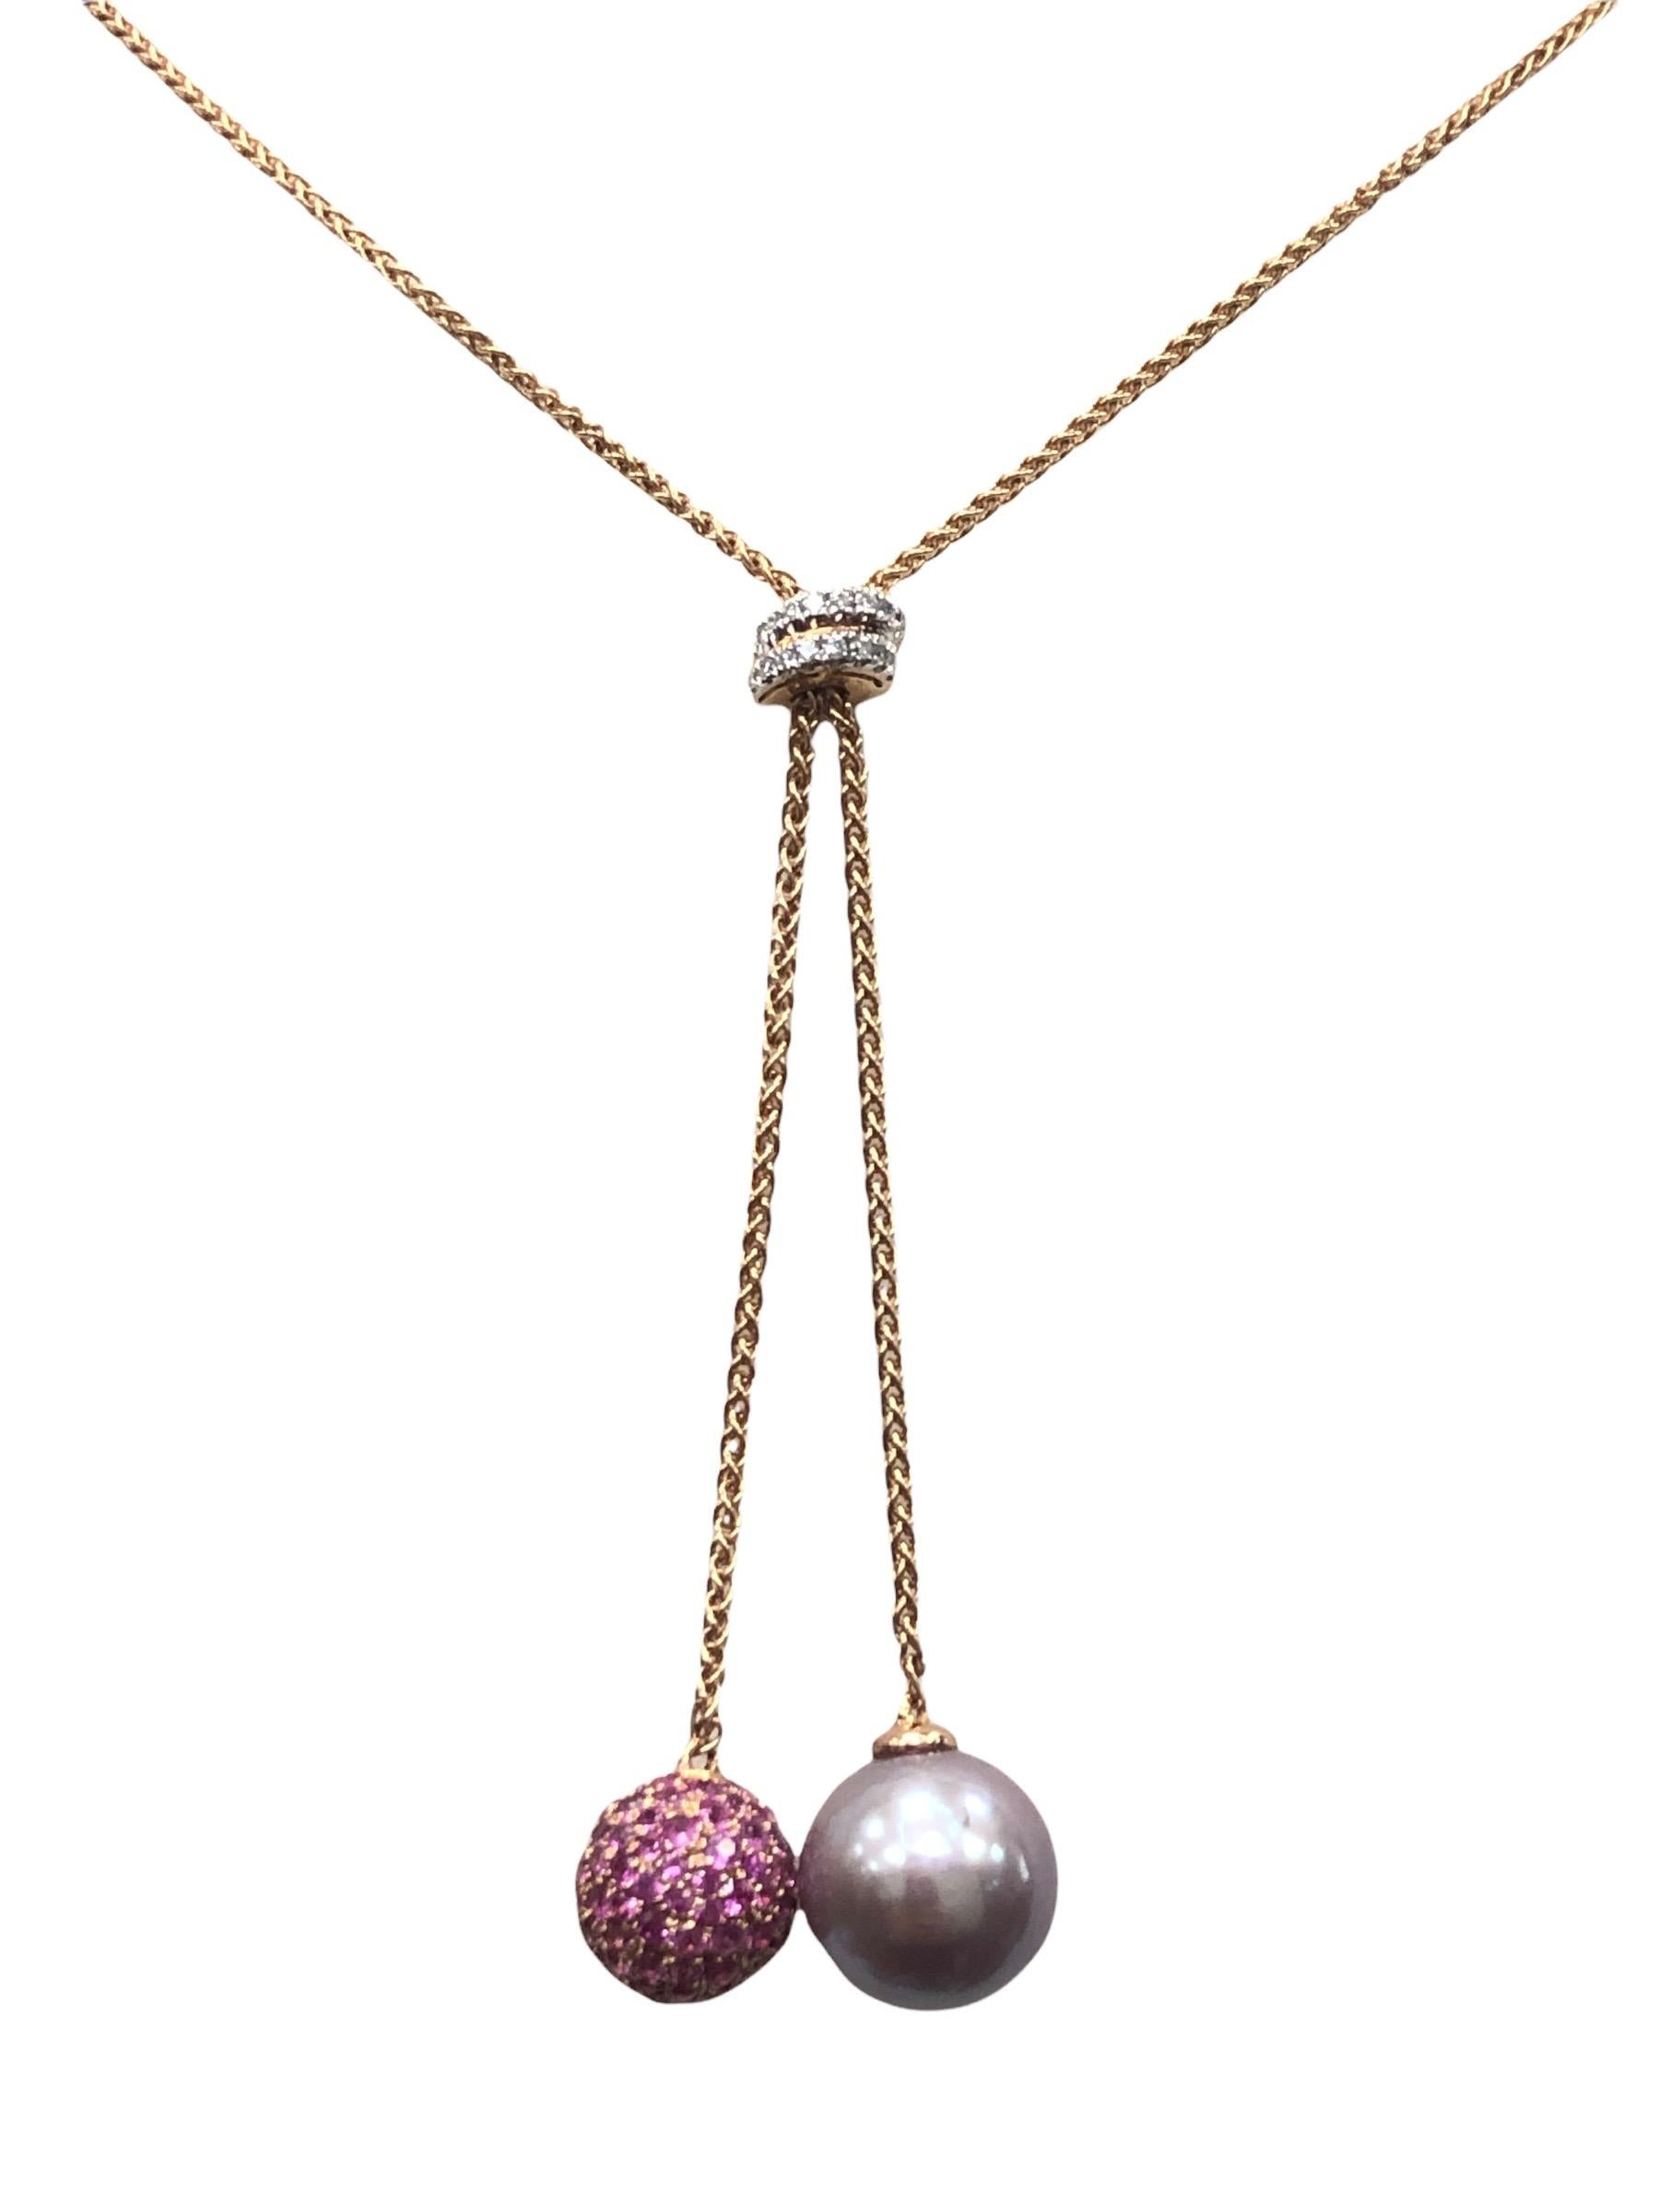 Adjustable necklace in 18k rose gold with 16 pieces round brillant diamonds , 184 pieces pink round sapphires and 1 piece purple fresh water pearl in 10.18mm , diamonds carat total weight 0.06 carats, sapphires carat total weight 1.96 carats. Length